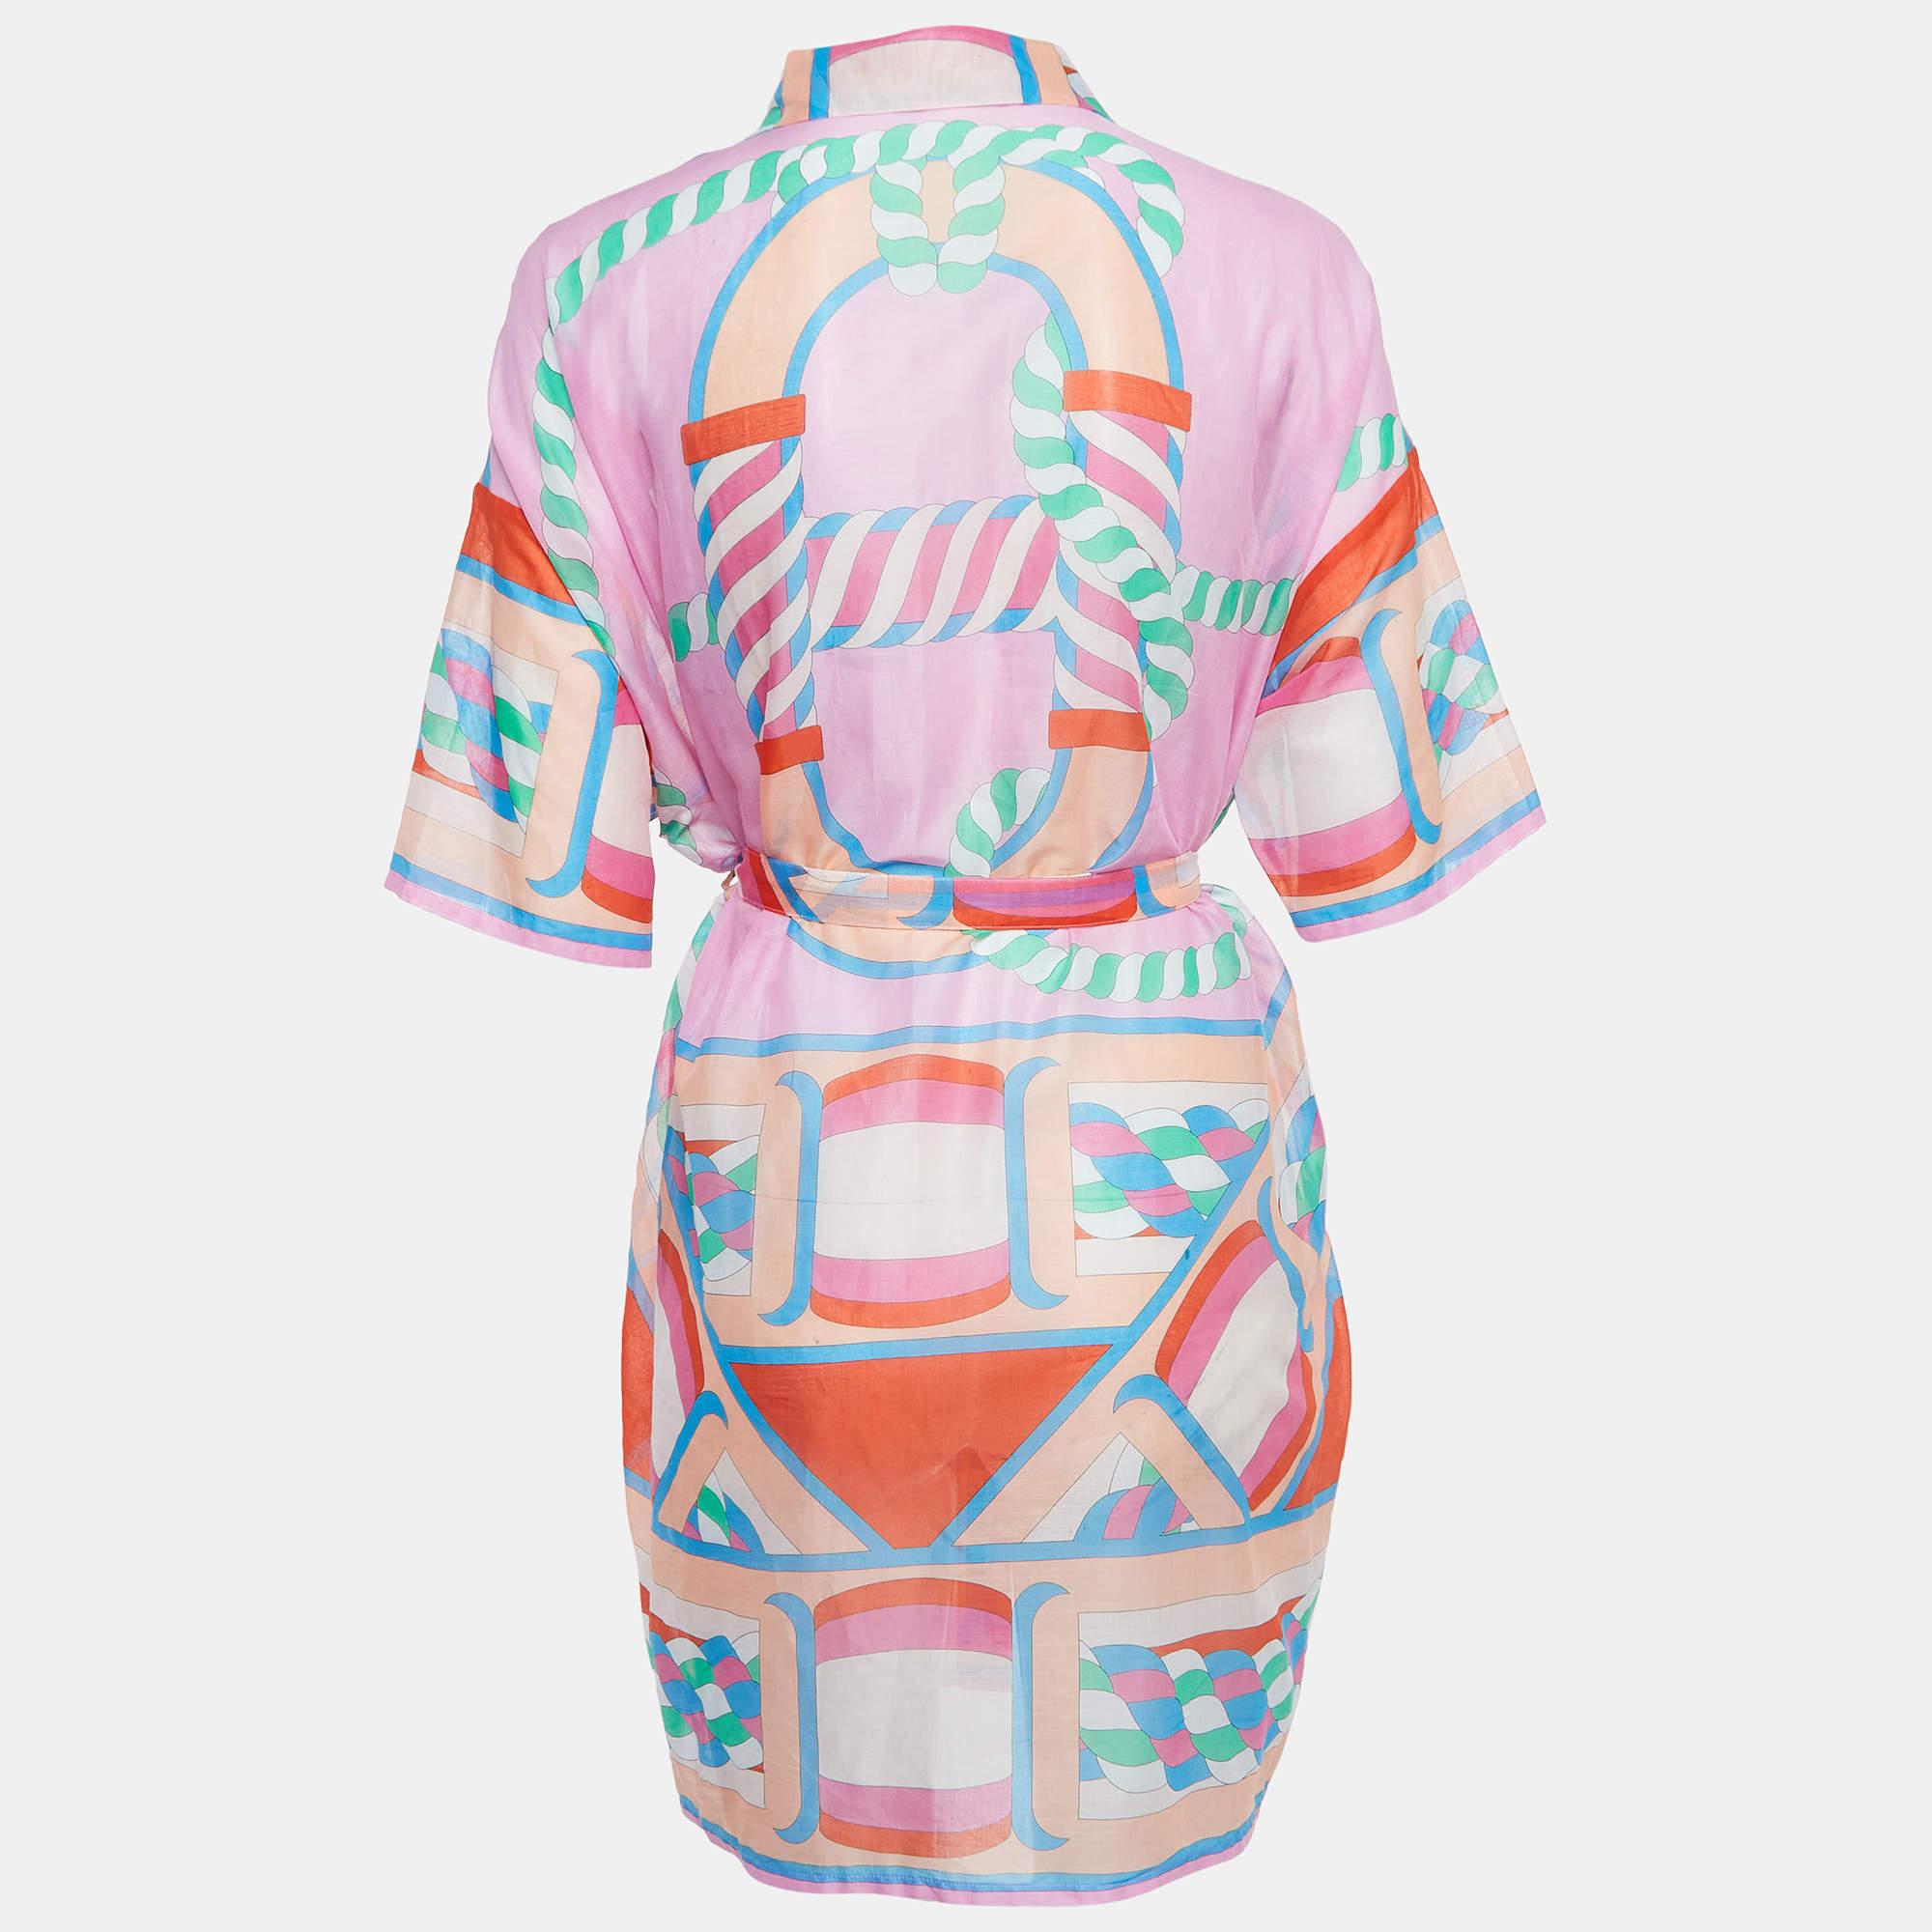 The Hermès dress is a vibrant and versatile garment featuring a canoe-inspired print. Crafted from high-quality cotton, it combines comfort with elegance, making it perfect for beach outings or as a stylish cover-up. The multicolored design adds a